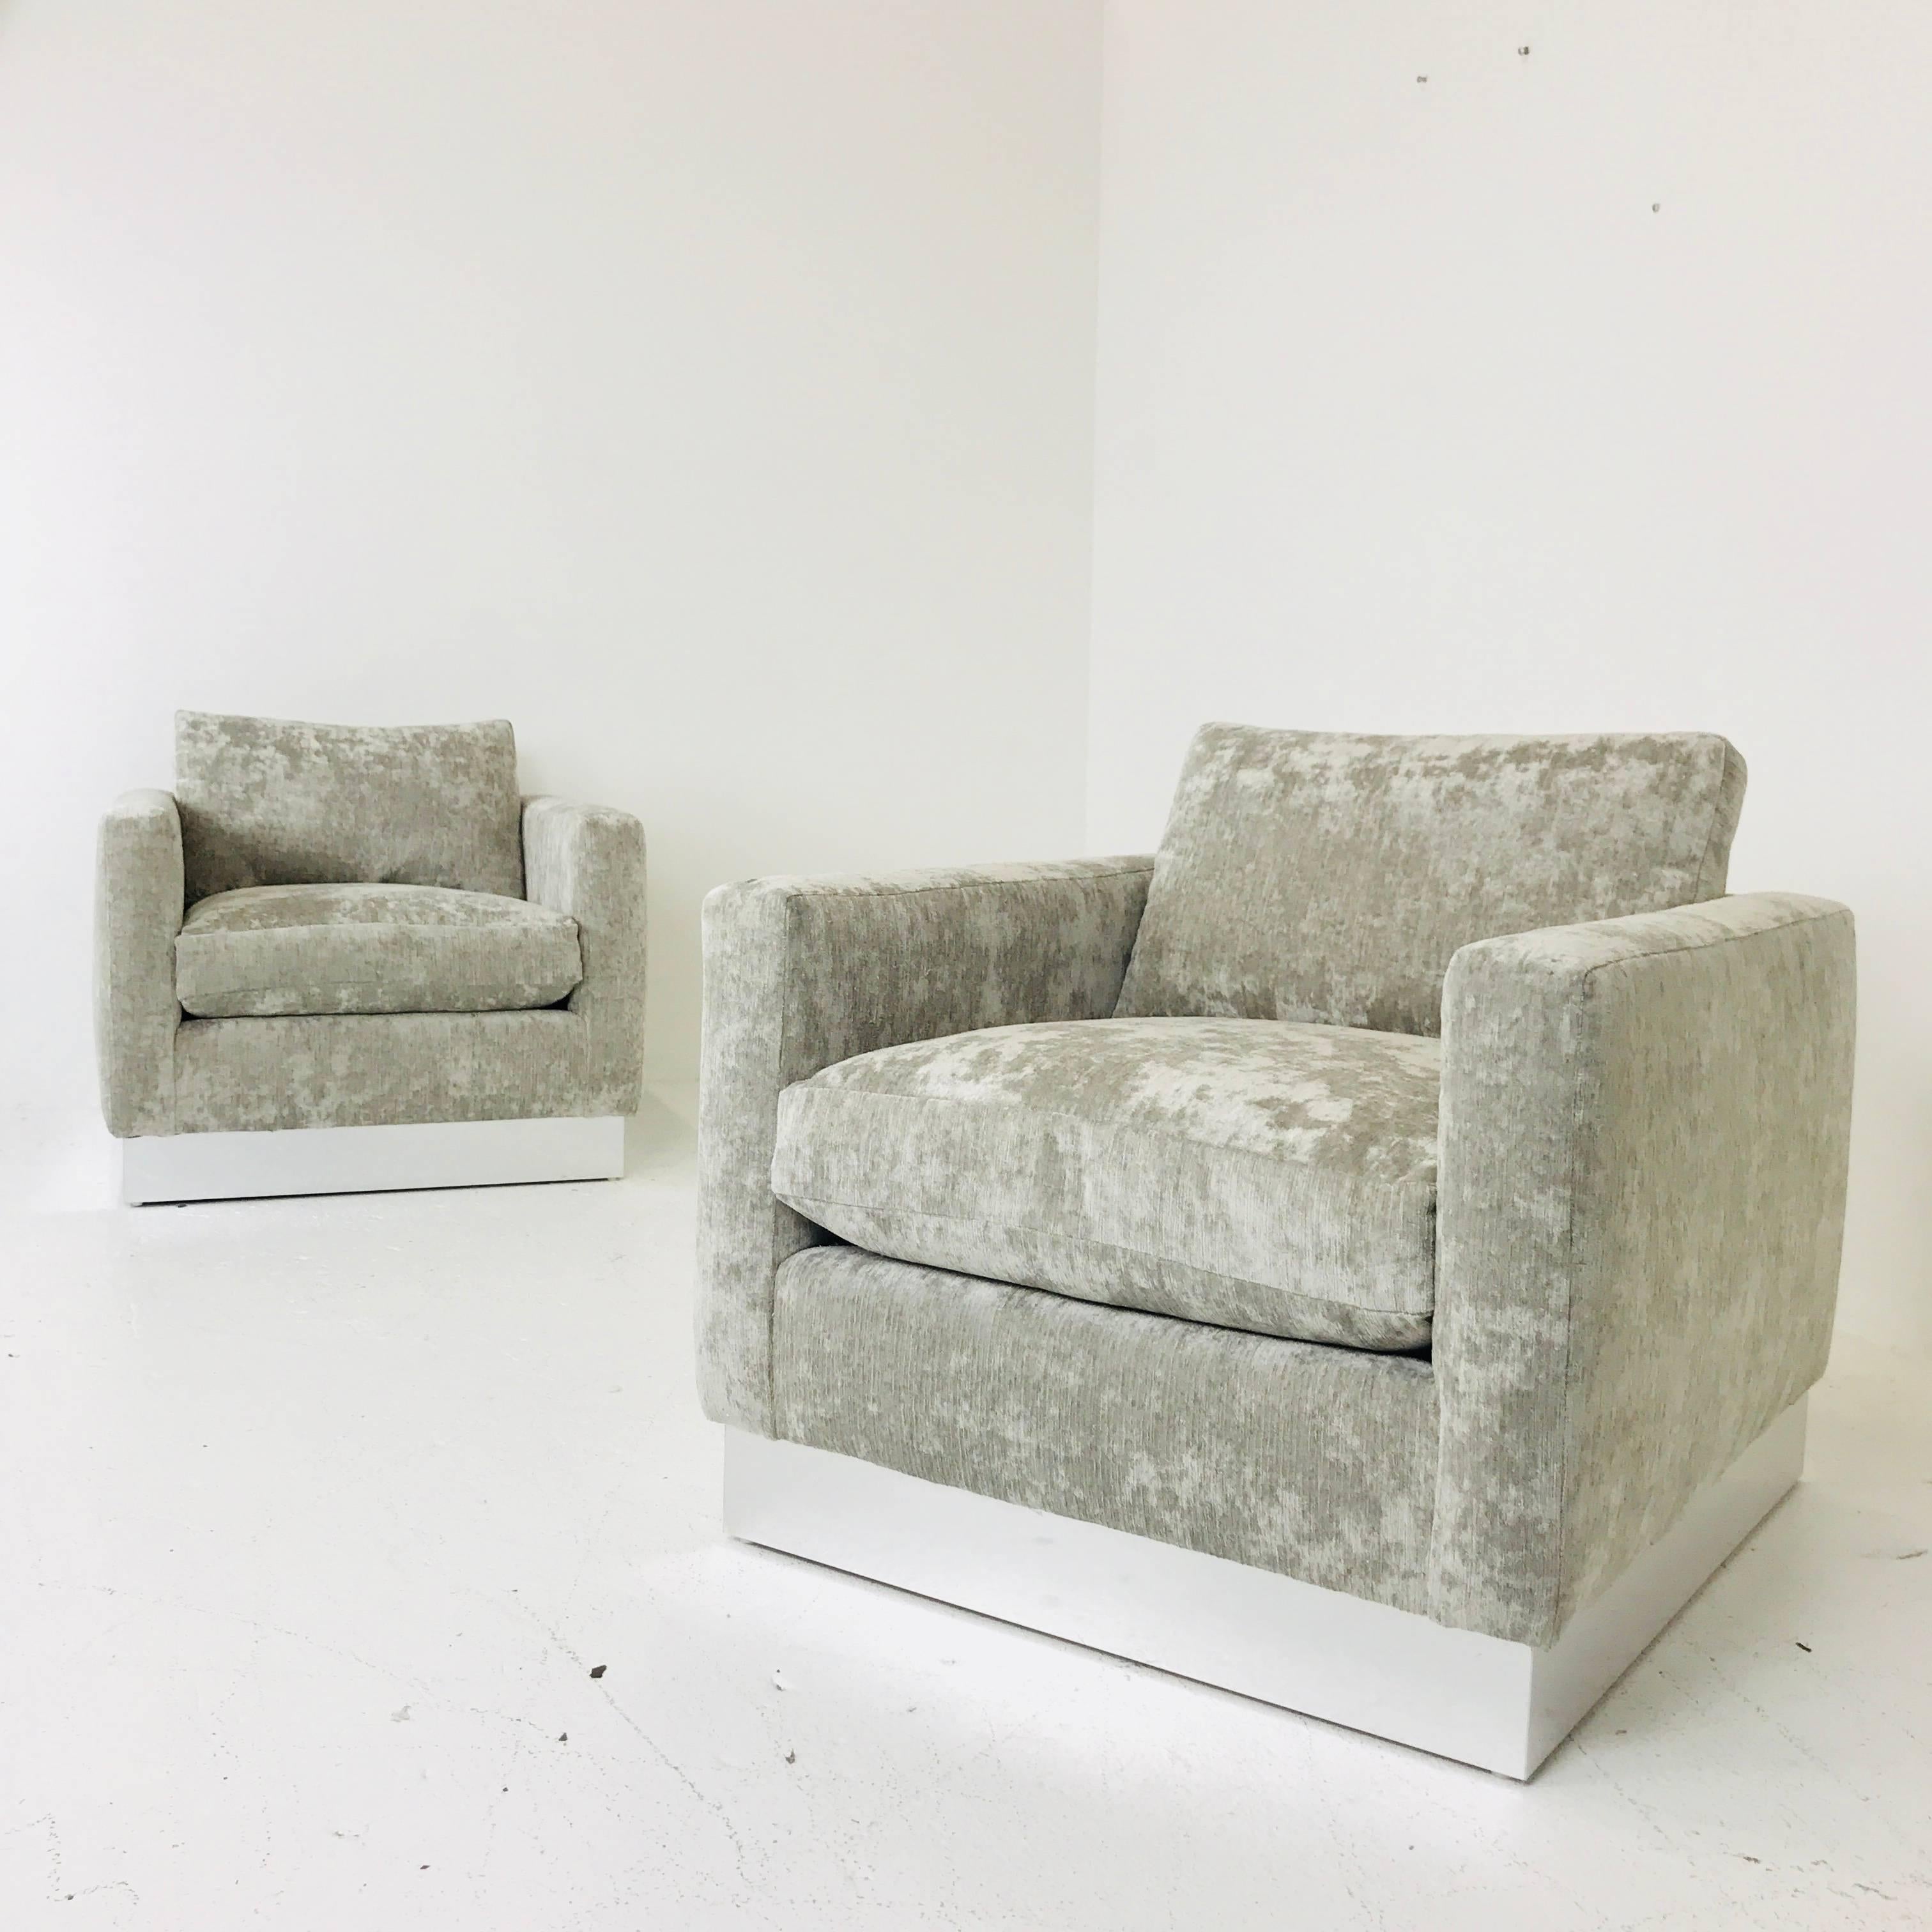 Pair of Milo Baughman Cube Chairs with Plinth Base 3